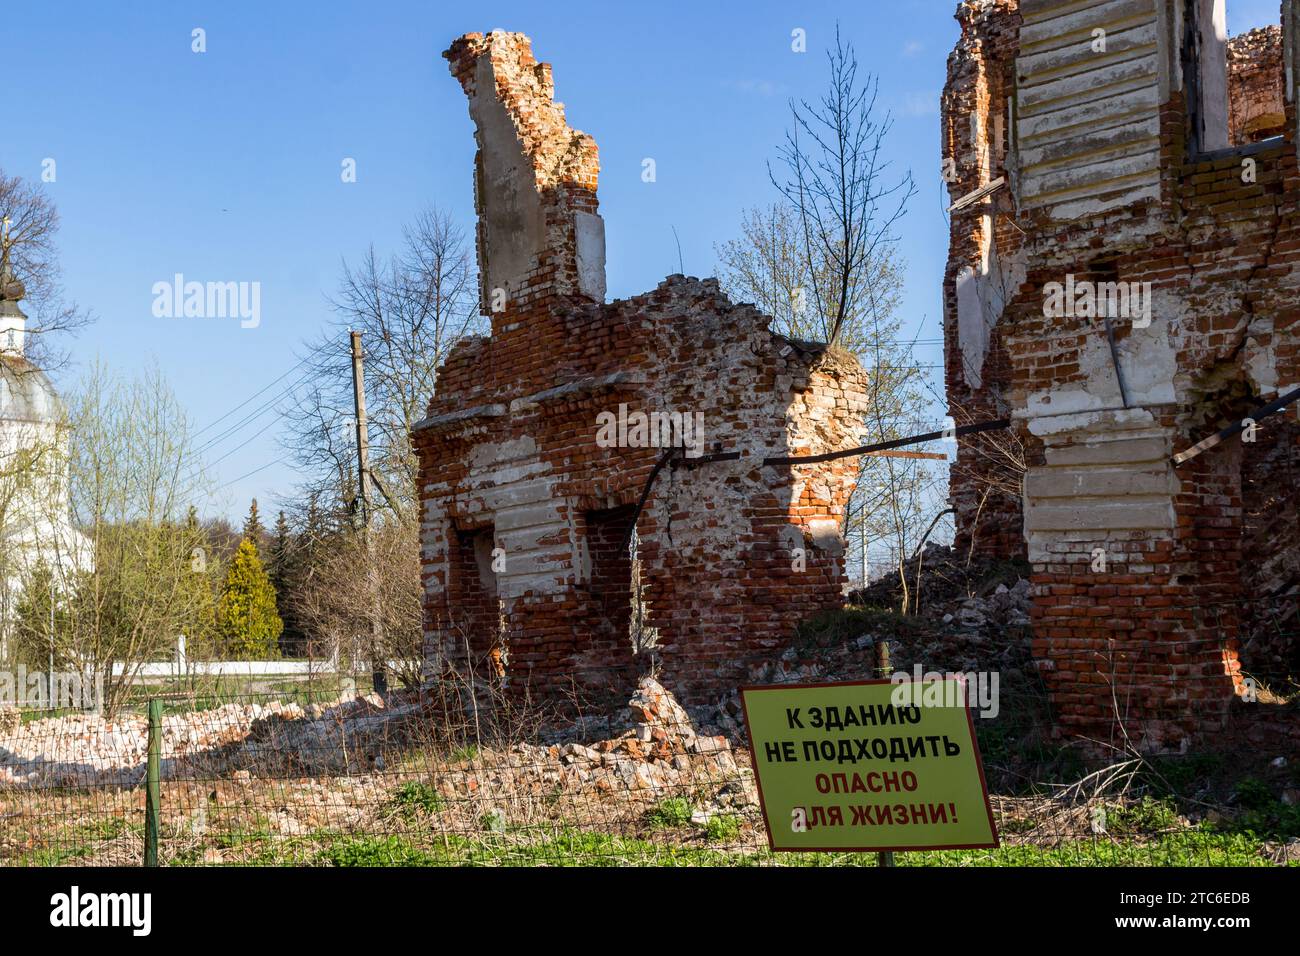 The wreckage of an old abandoned building with a sign Do not approach the building. Danger to life. Belkino Estate, Obninsk, Russia Stock Photo